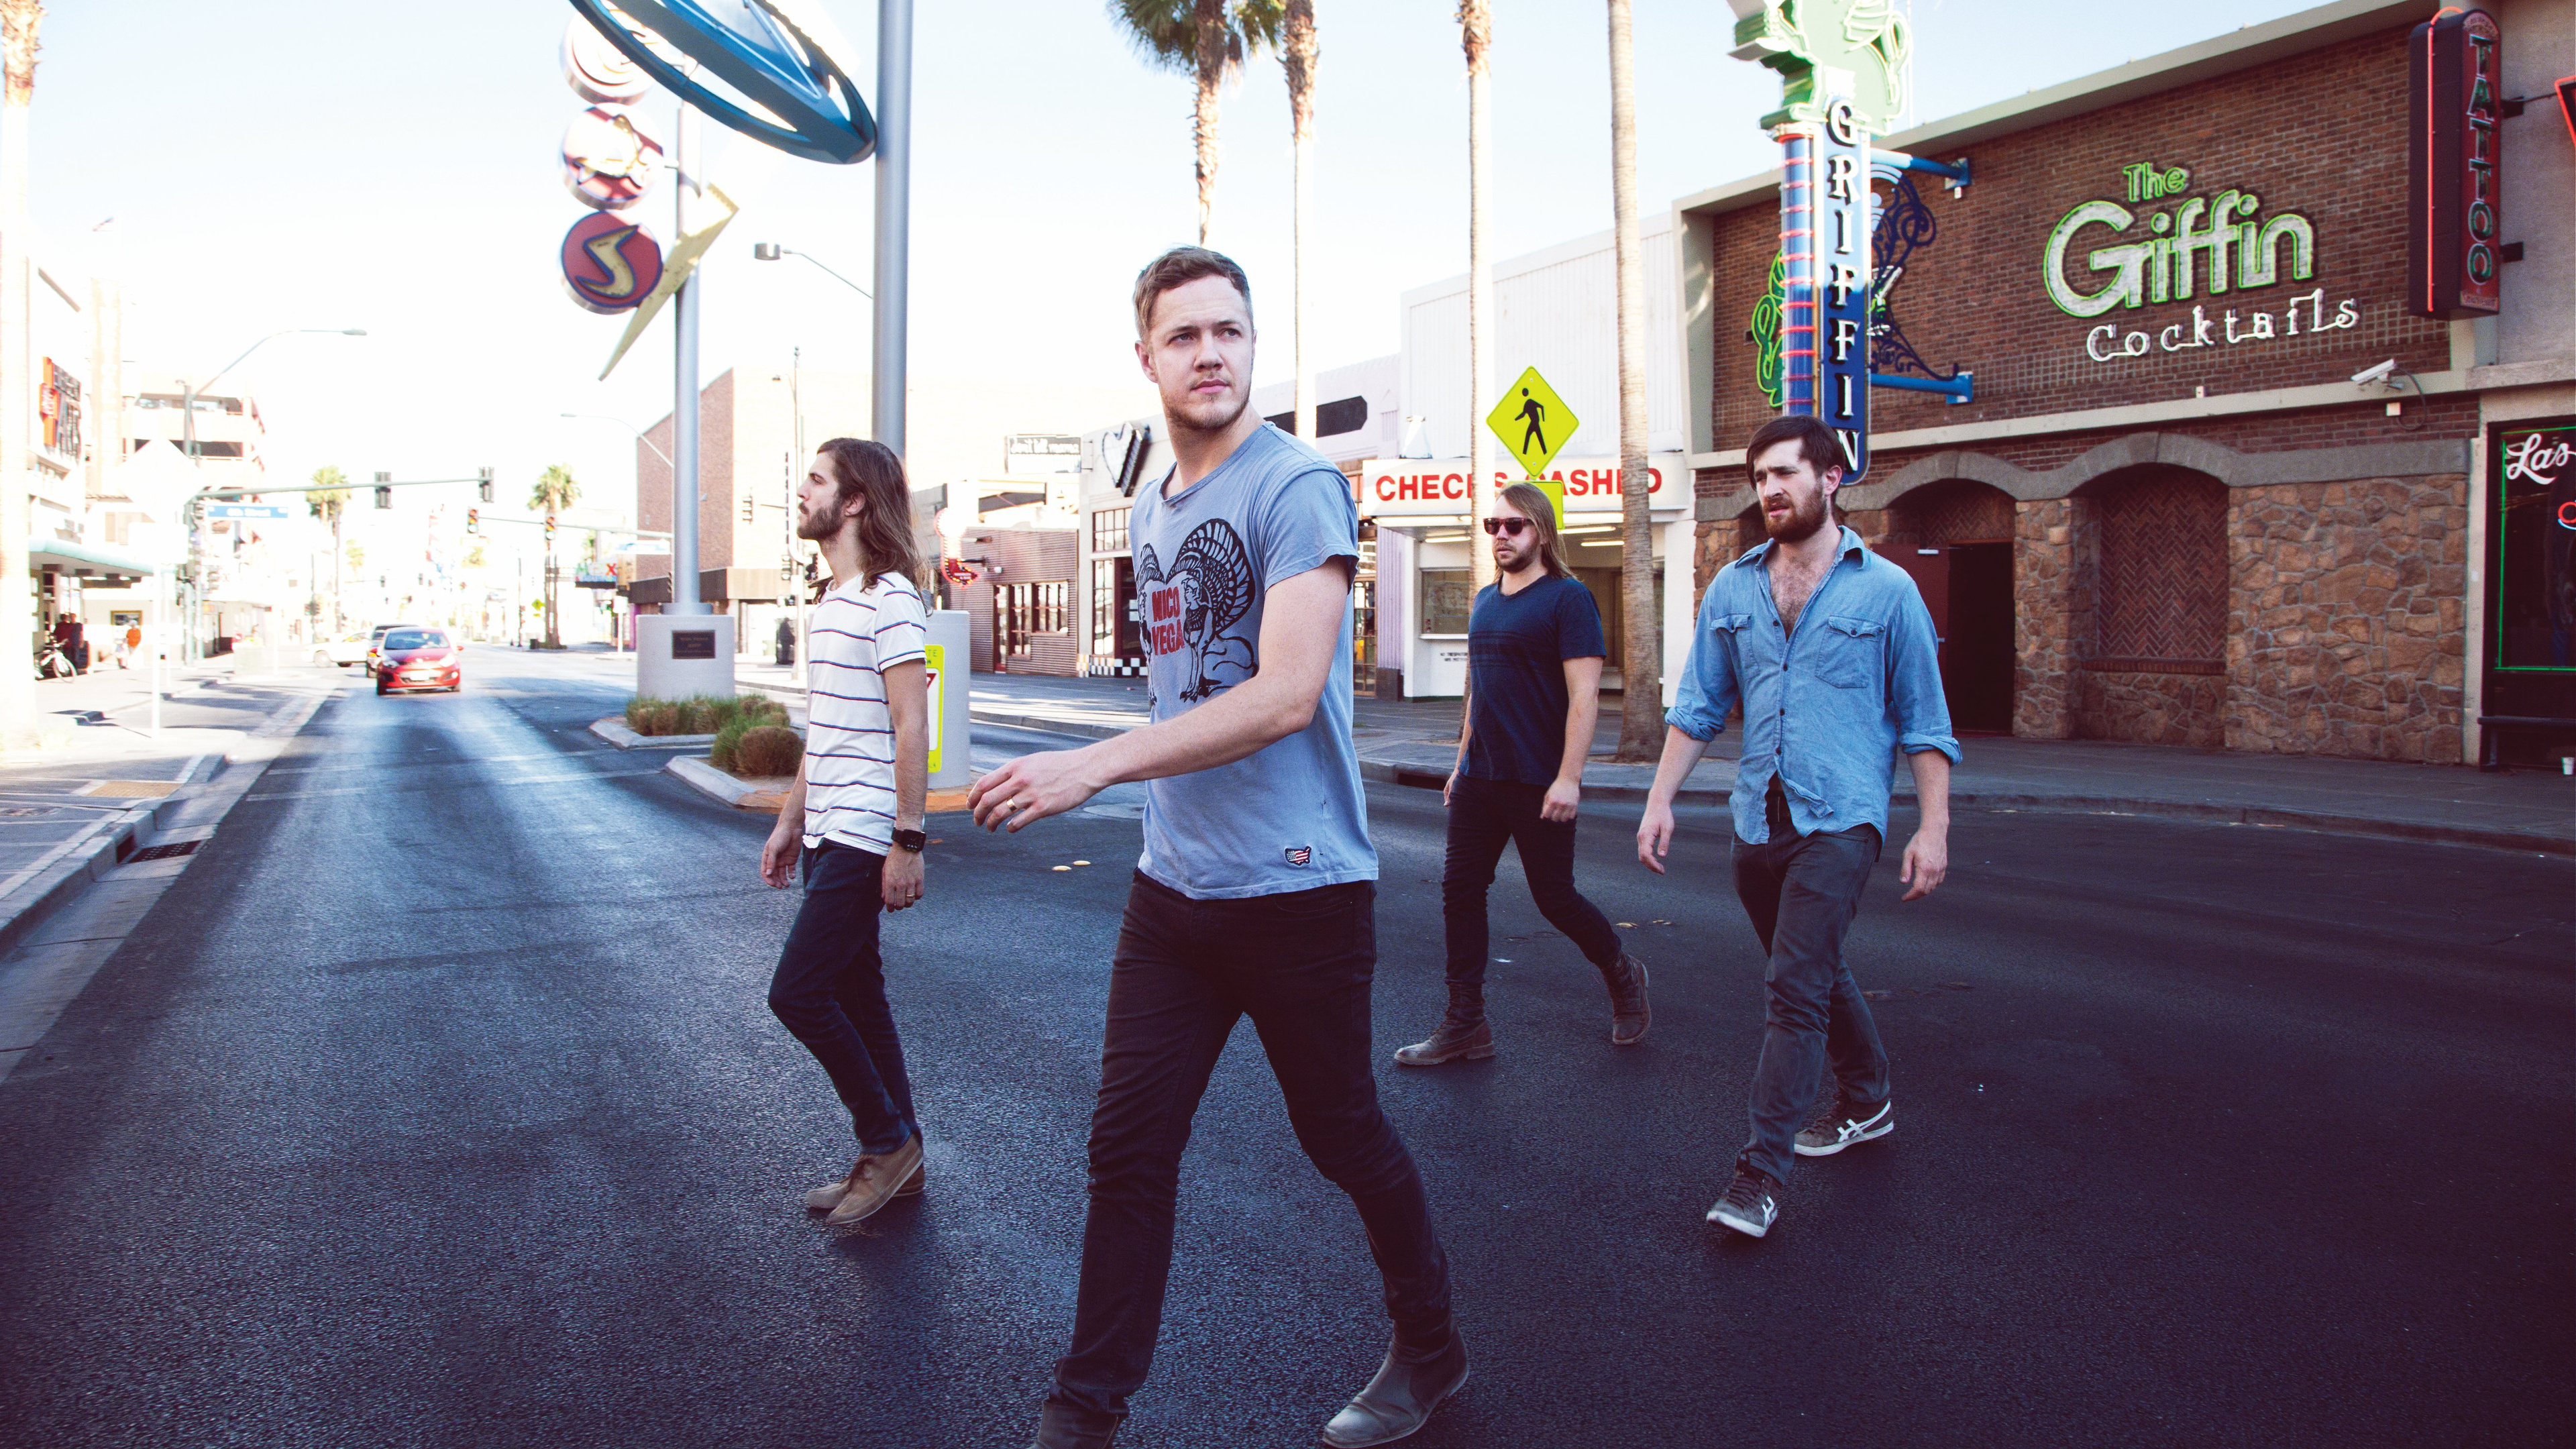 Music Band: Imagine Dragons, American pop-rock artists, Formed in 2008 in Las Vegas. 3840x2160 4K Background.